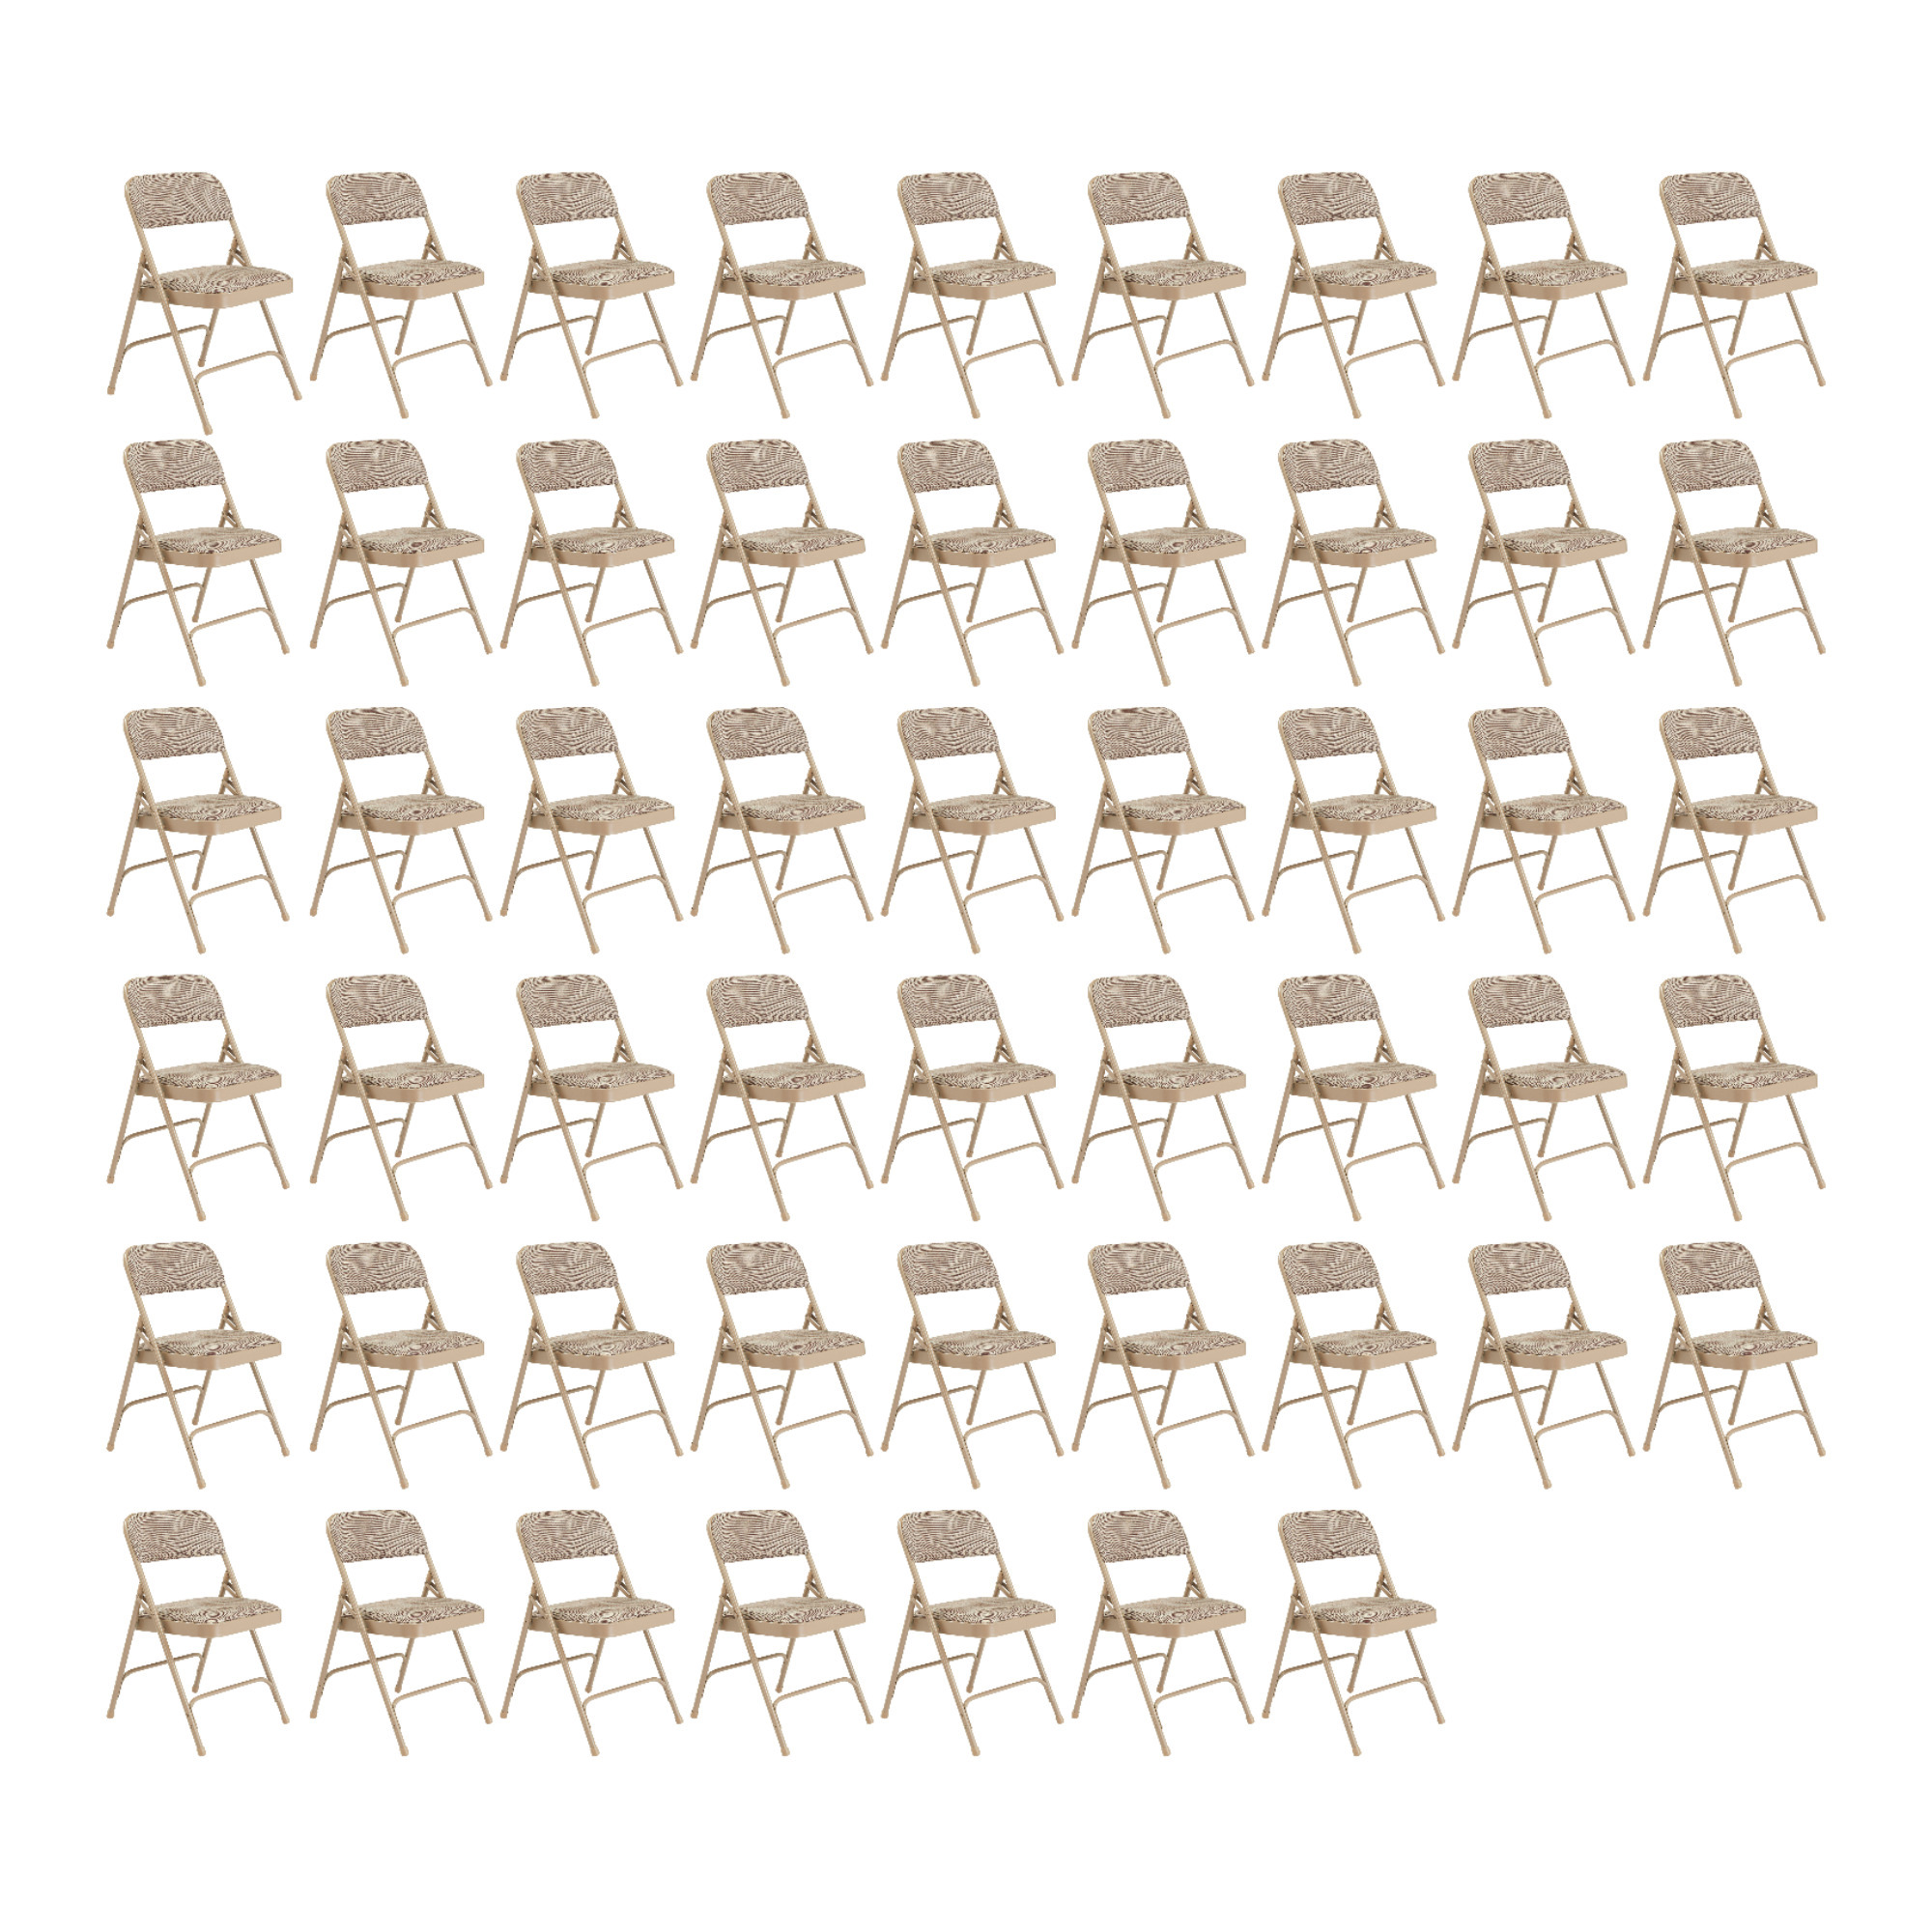 National Public Seating 2200 Series Deluxe Fabric Upholstered Folding Chair, Cafe Beige (52-Pack) -  2201/52